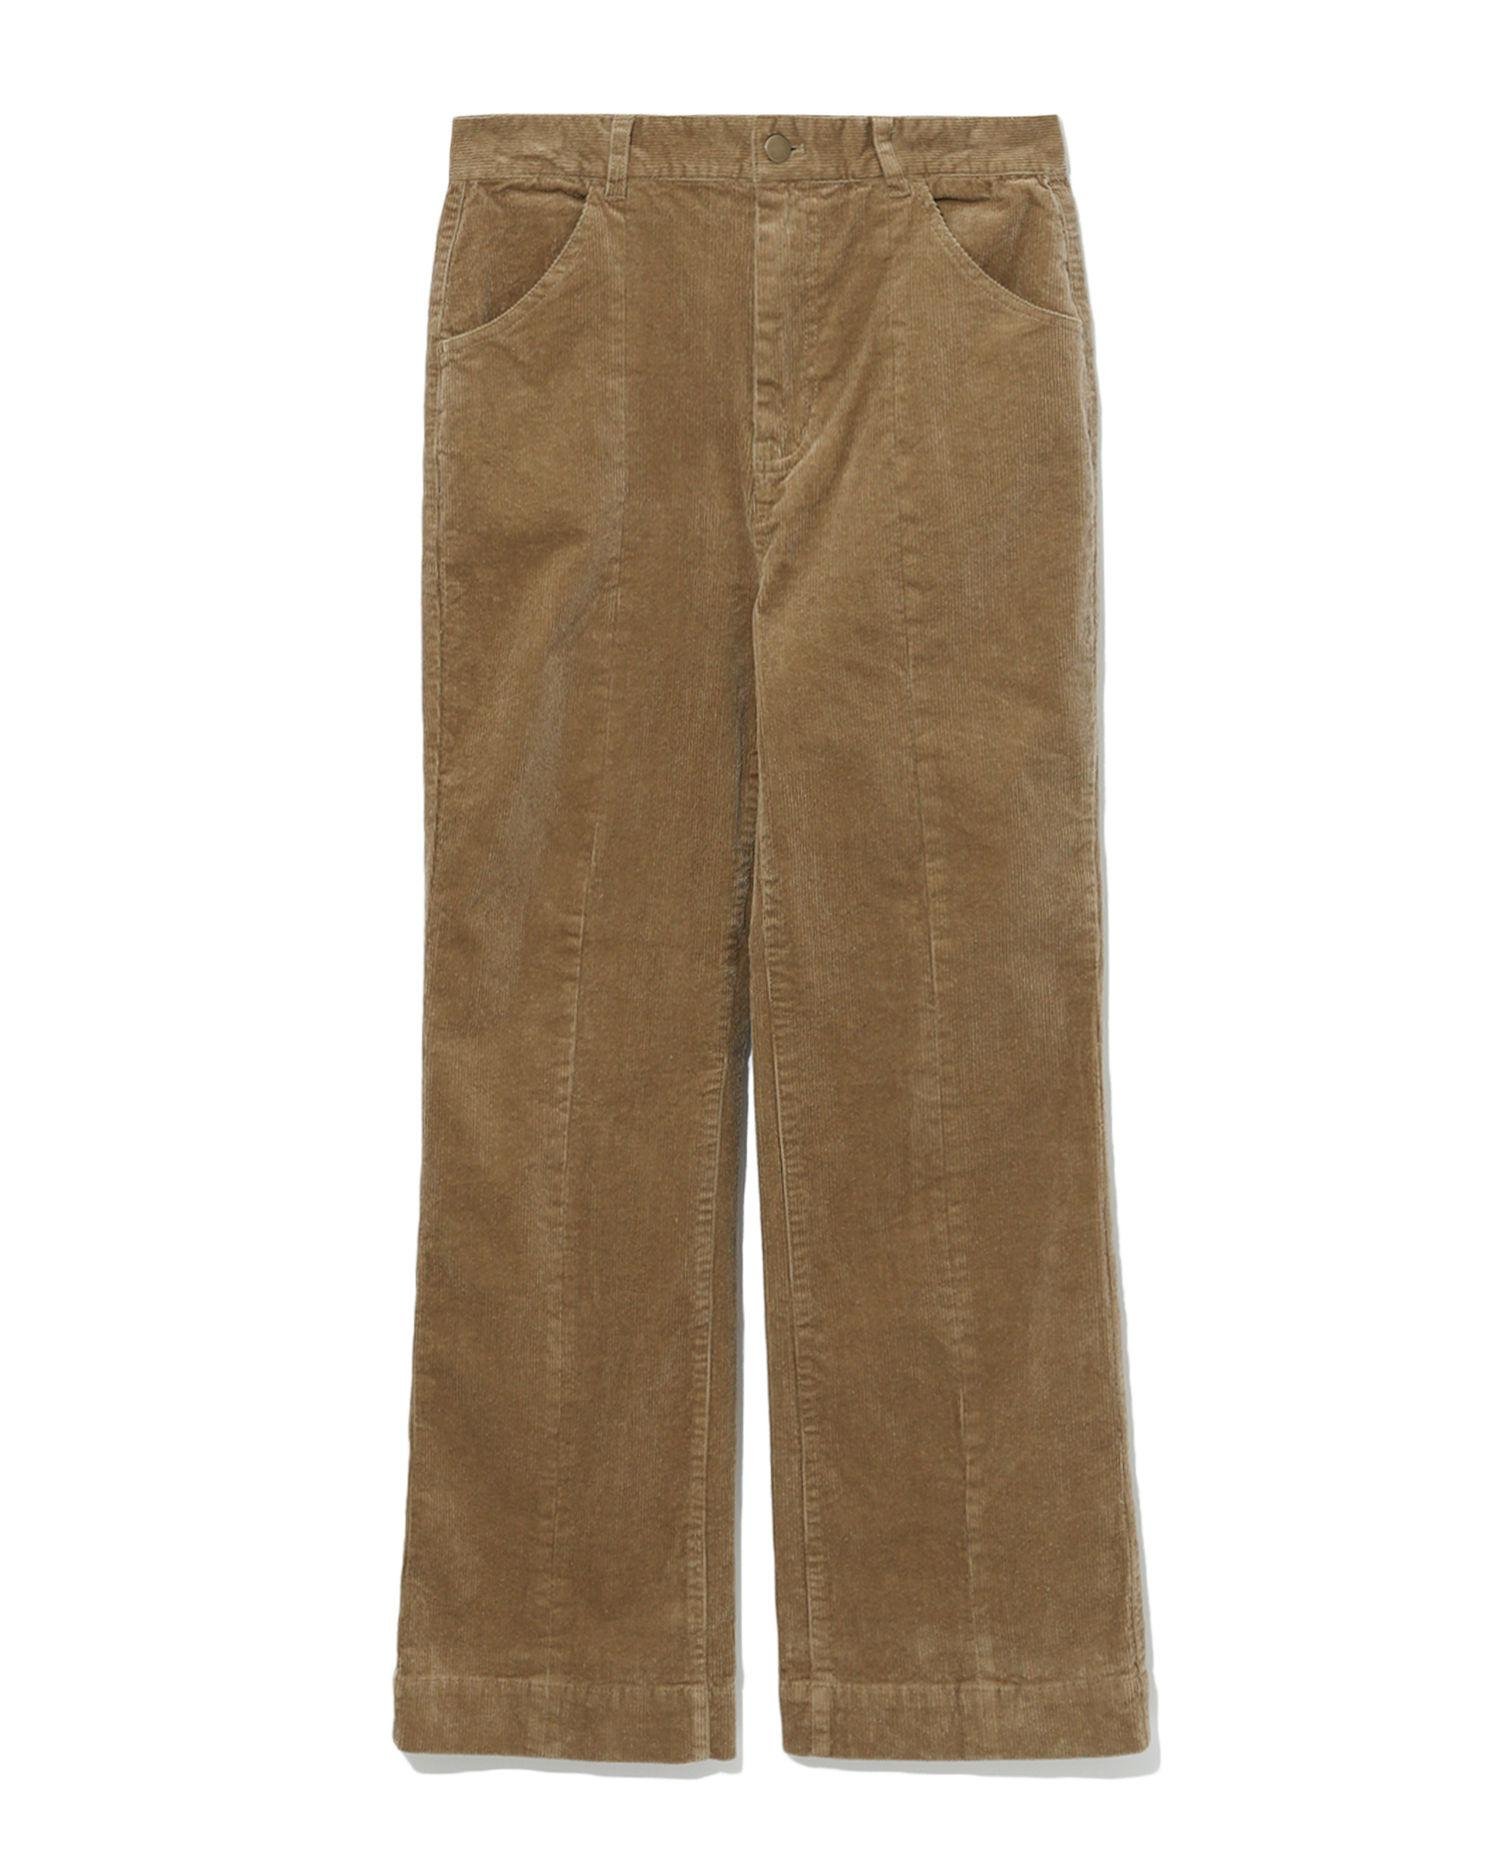 Corduroy pants by AS KNOW AS PINKY